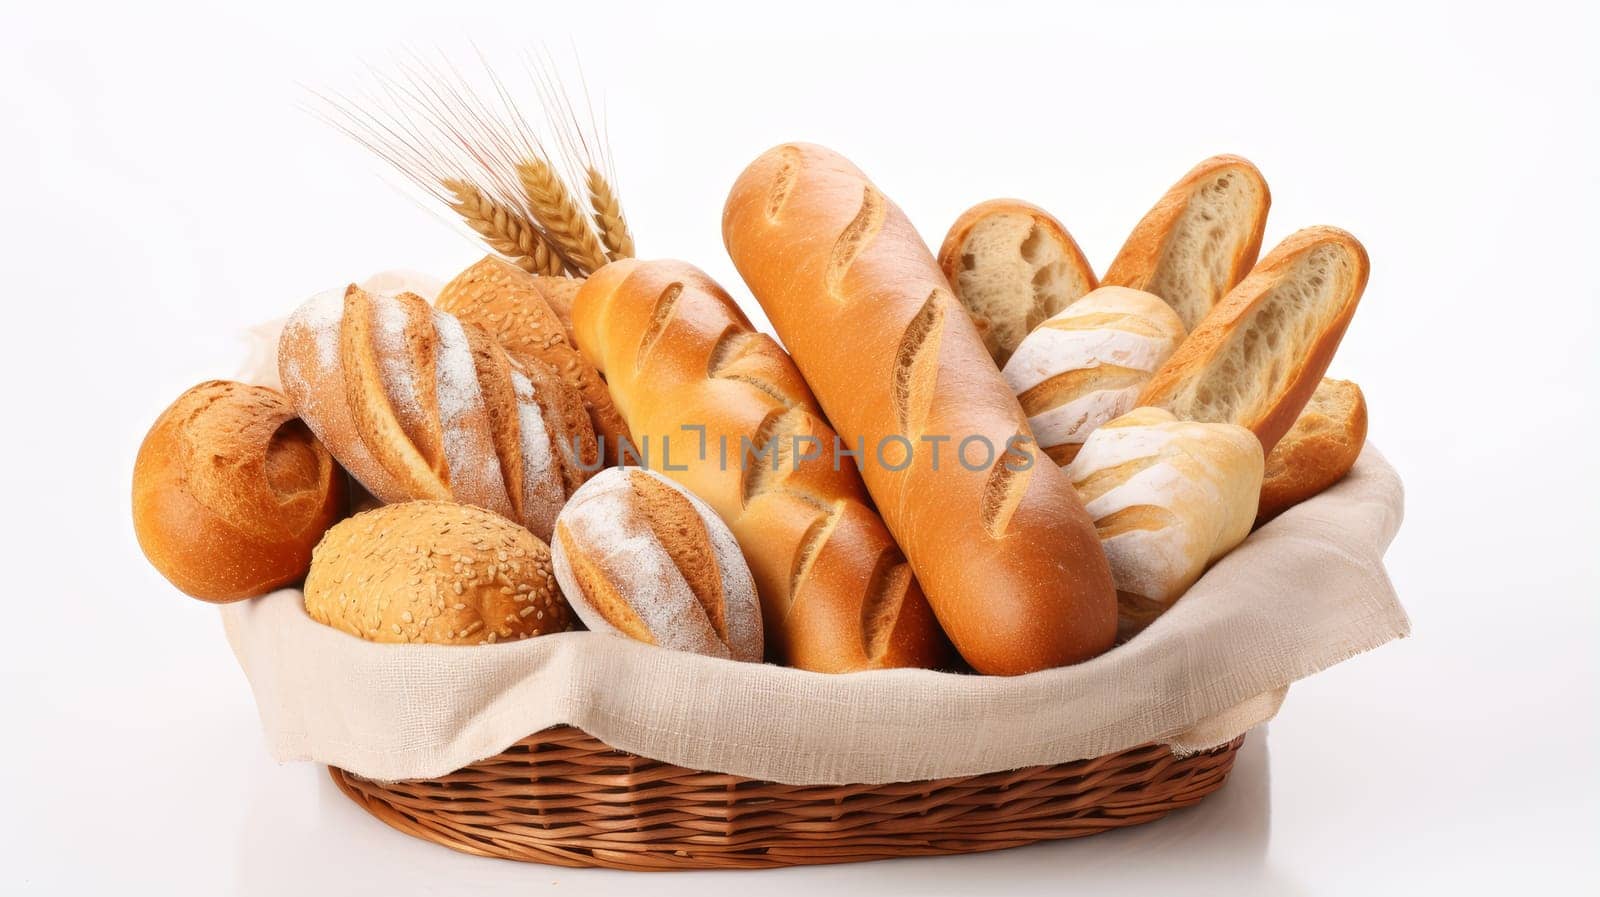 Basket with fresh bread on the table, on a white background, all inclusive, store. Fresh classic pastries. by Alla_Yurtayeva